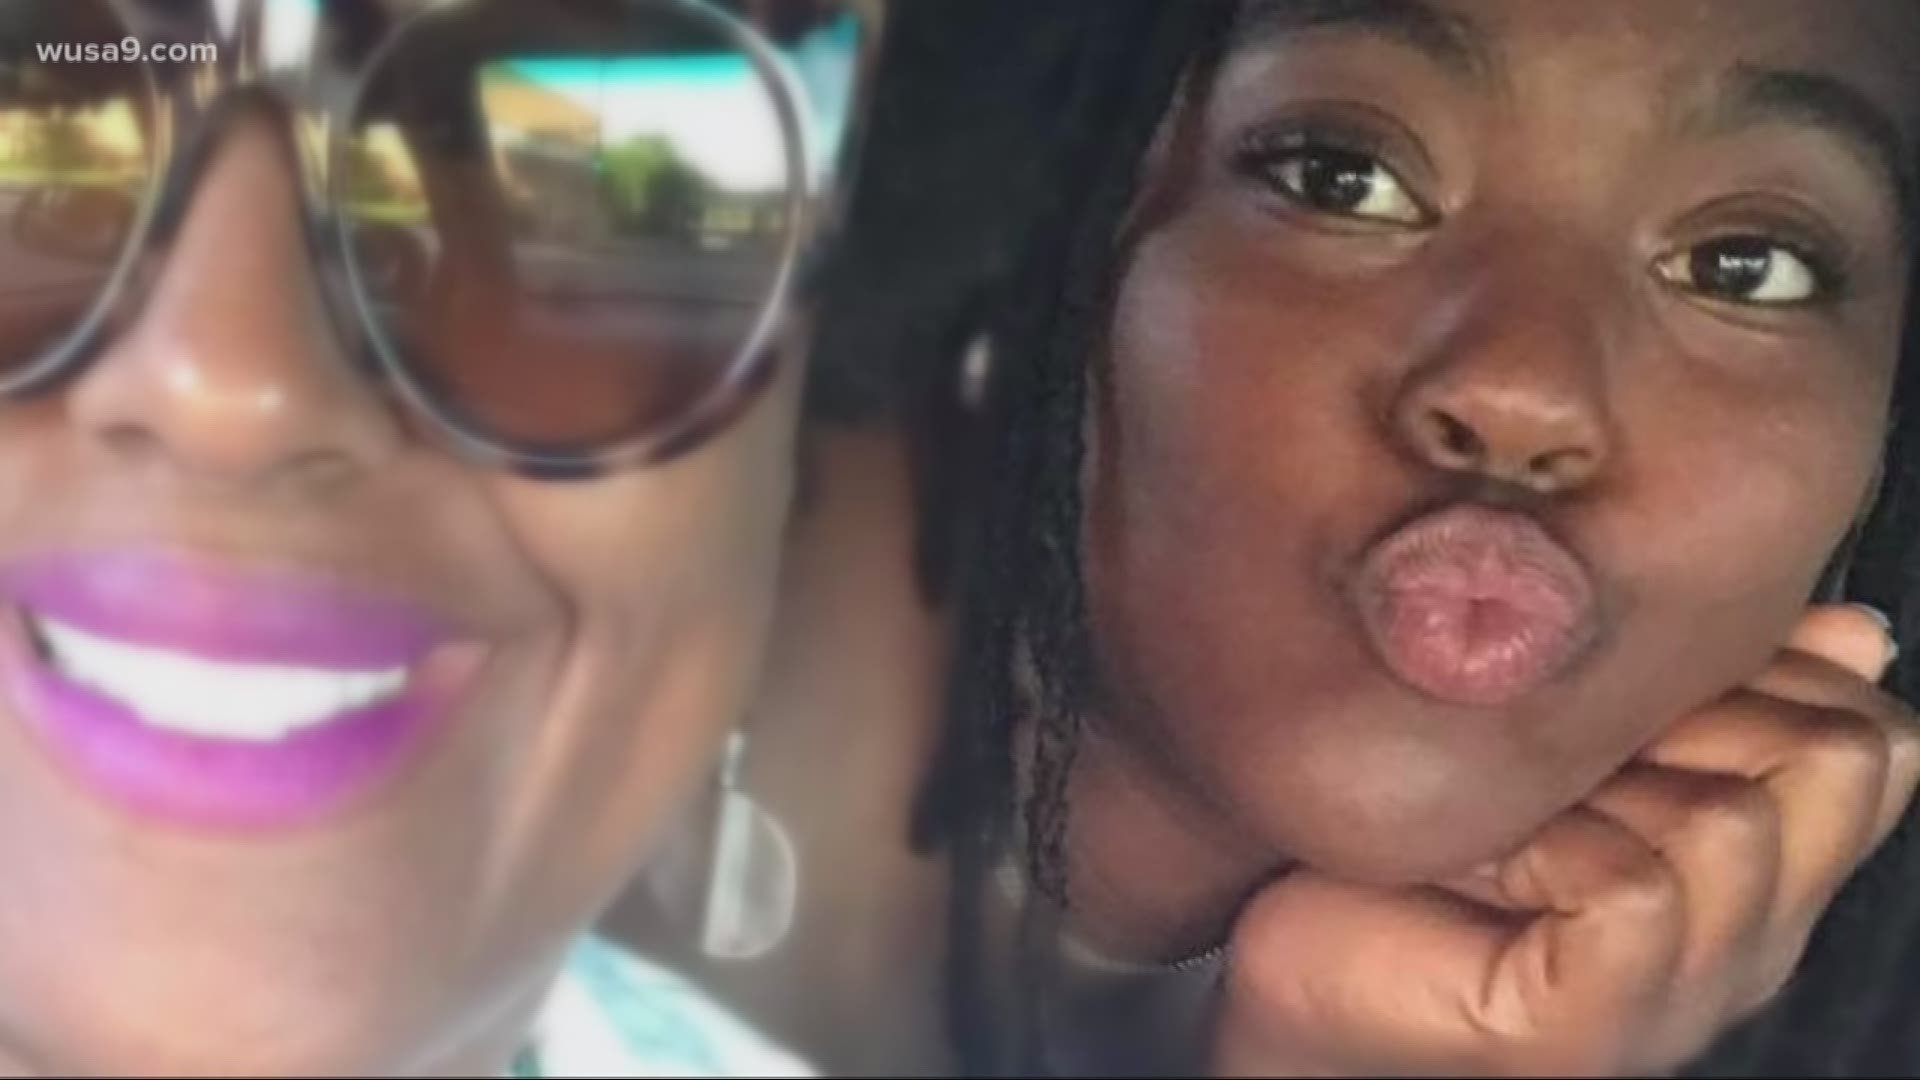 18-year-old Marakah Dennis had received the vaccination for bacterial meningitis, but there is no shot for the viral strand, which coroner says killed her.